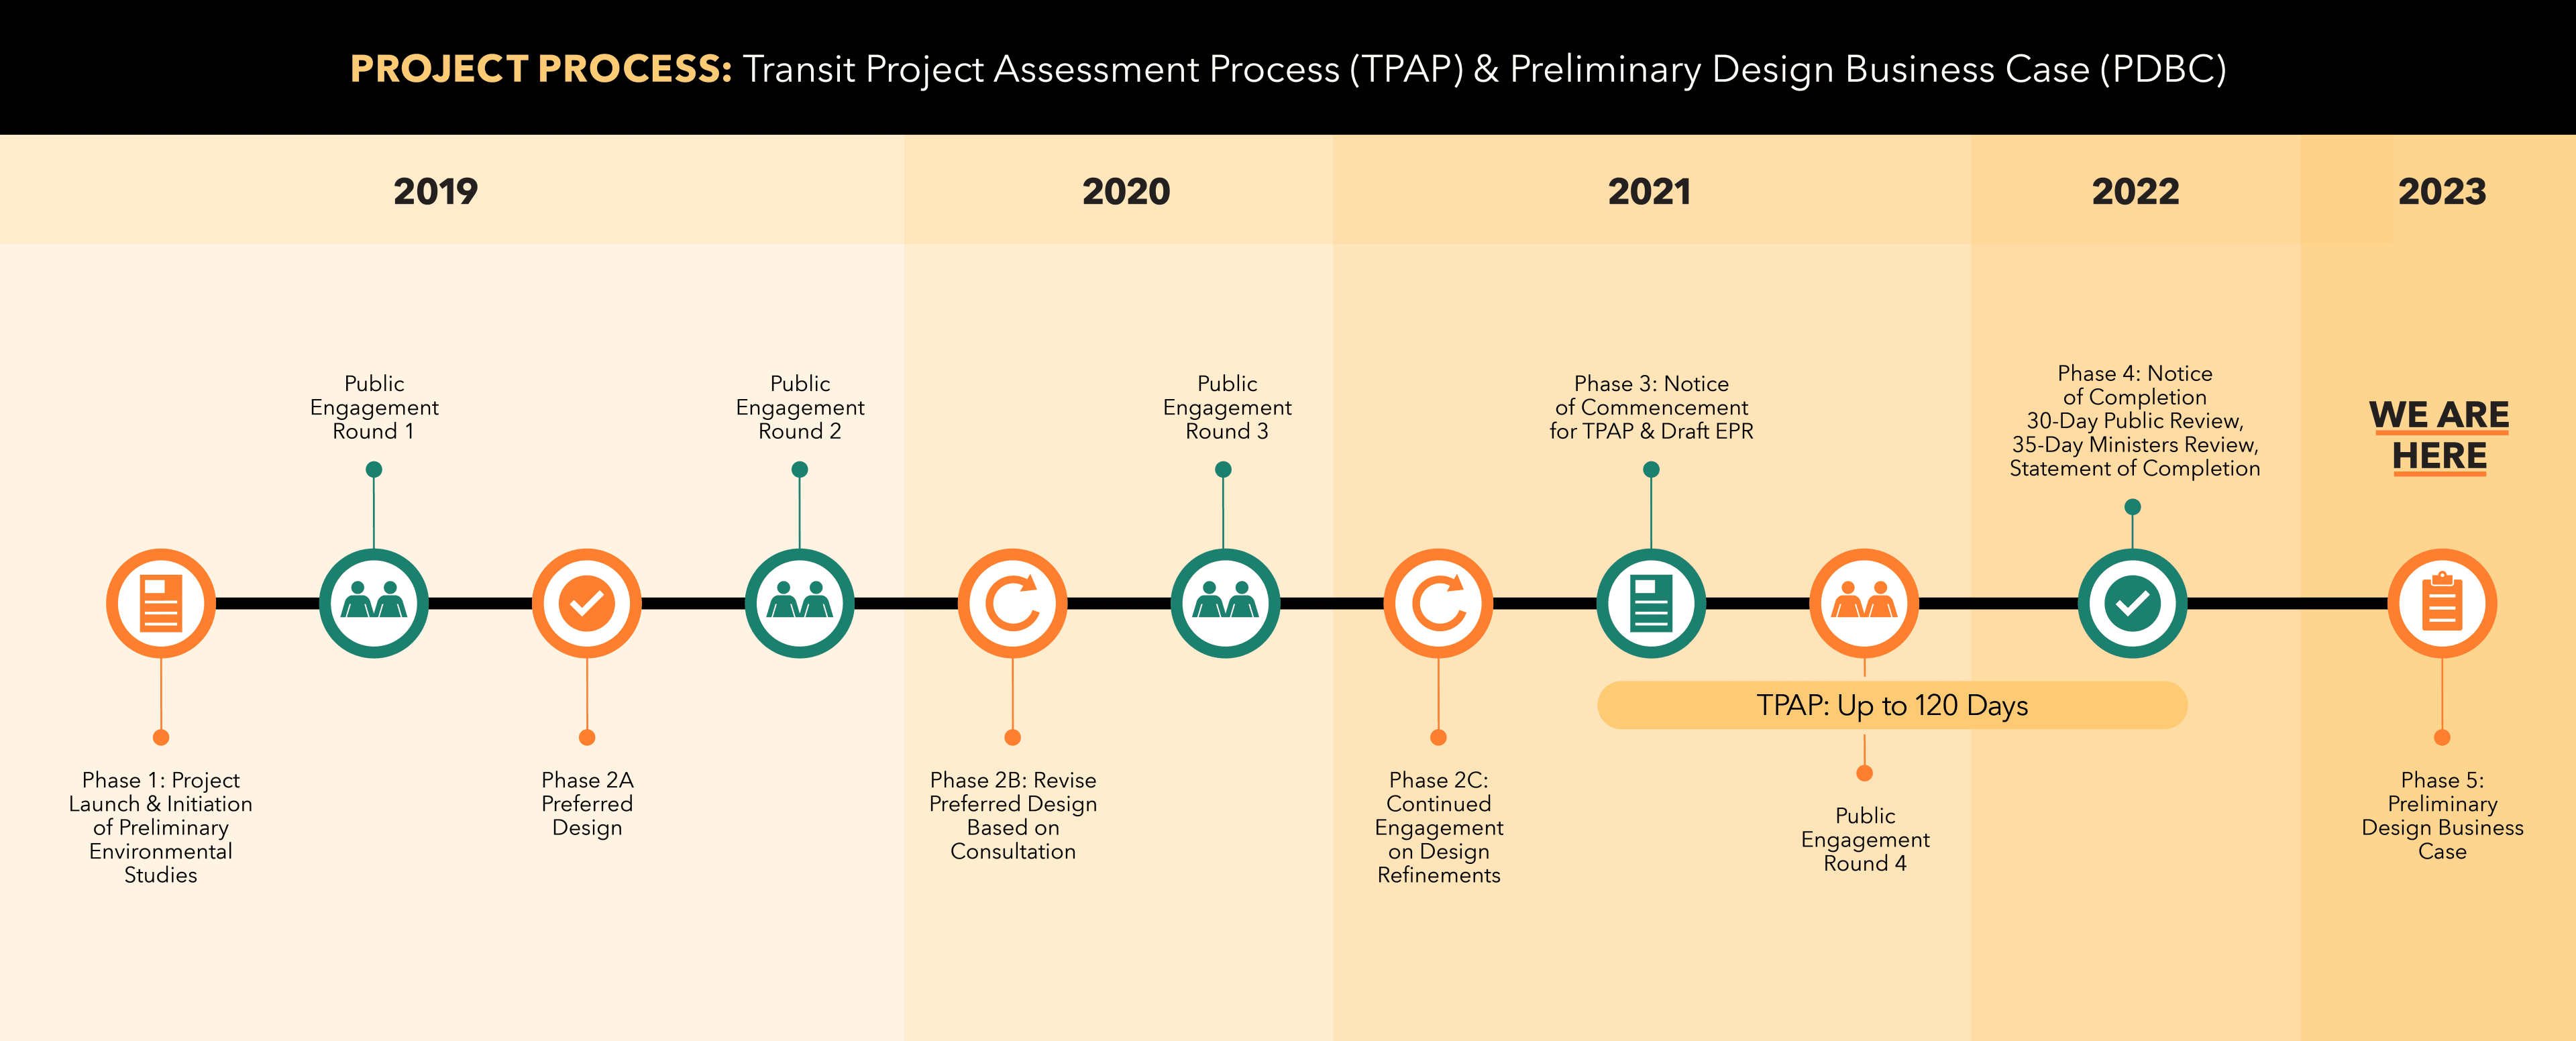 Project Process: TPAP and PDBC